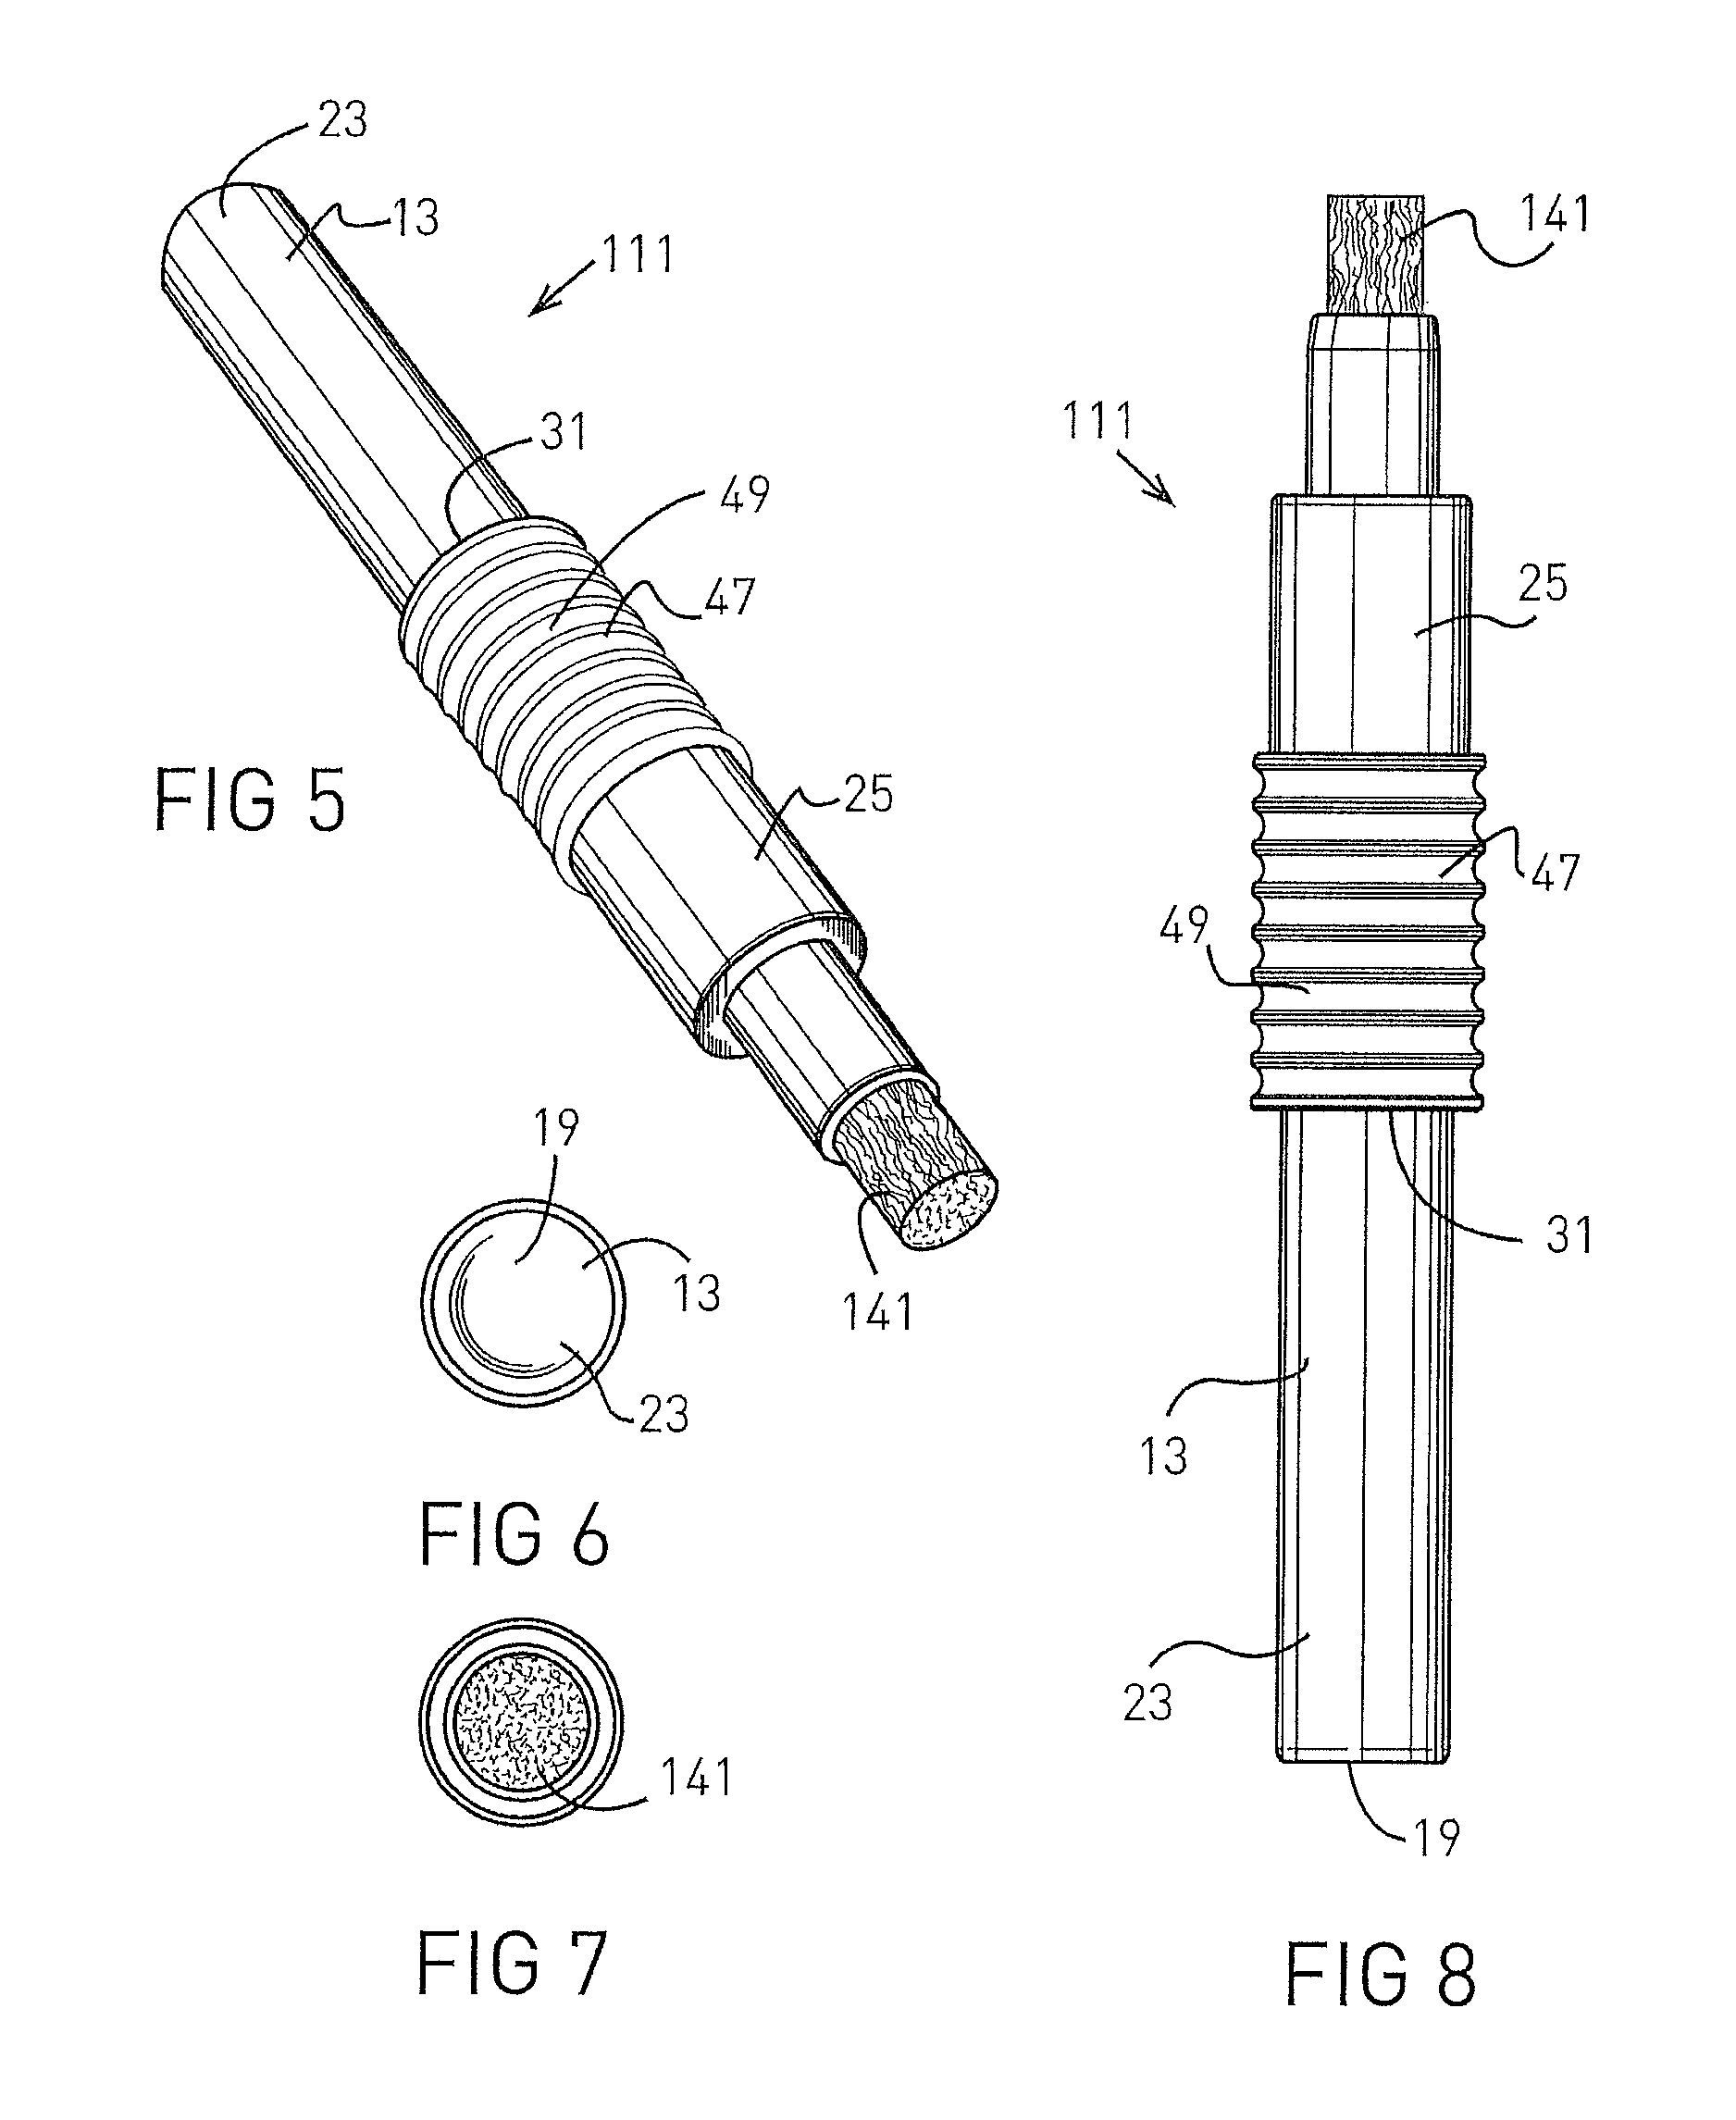 Single and multiple use applicator for volatile fluids having a protective device for guarding against being cut by glass shards formed within the applicator